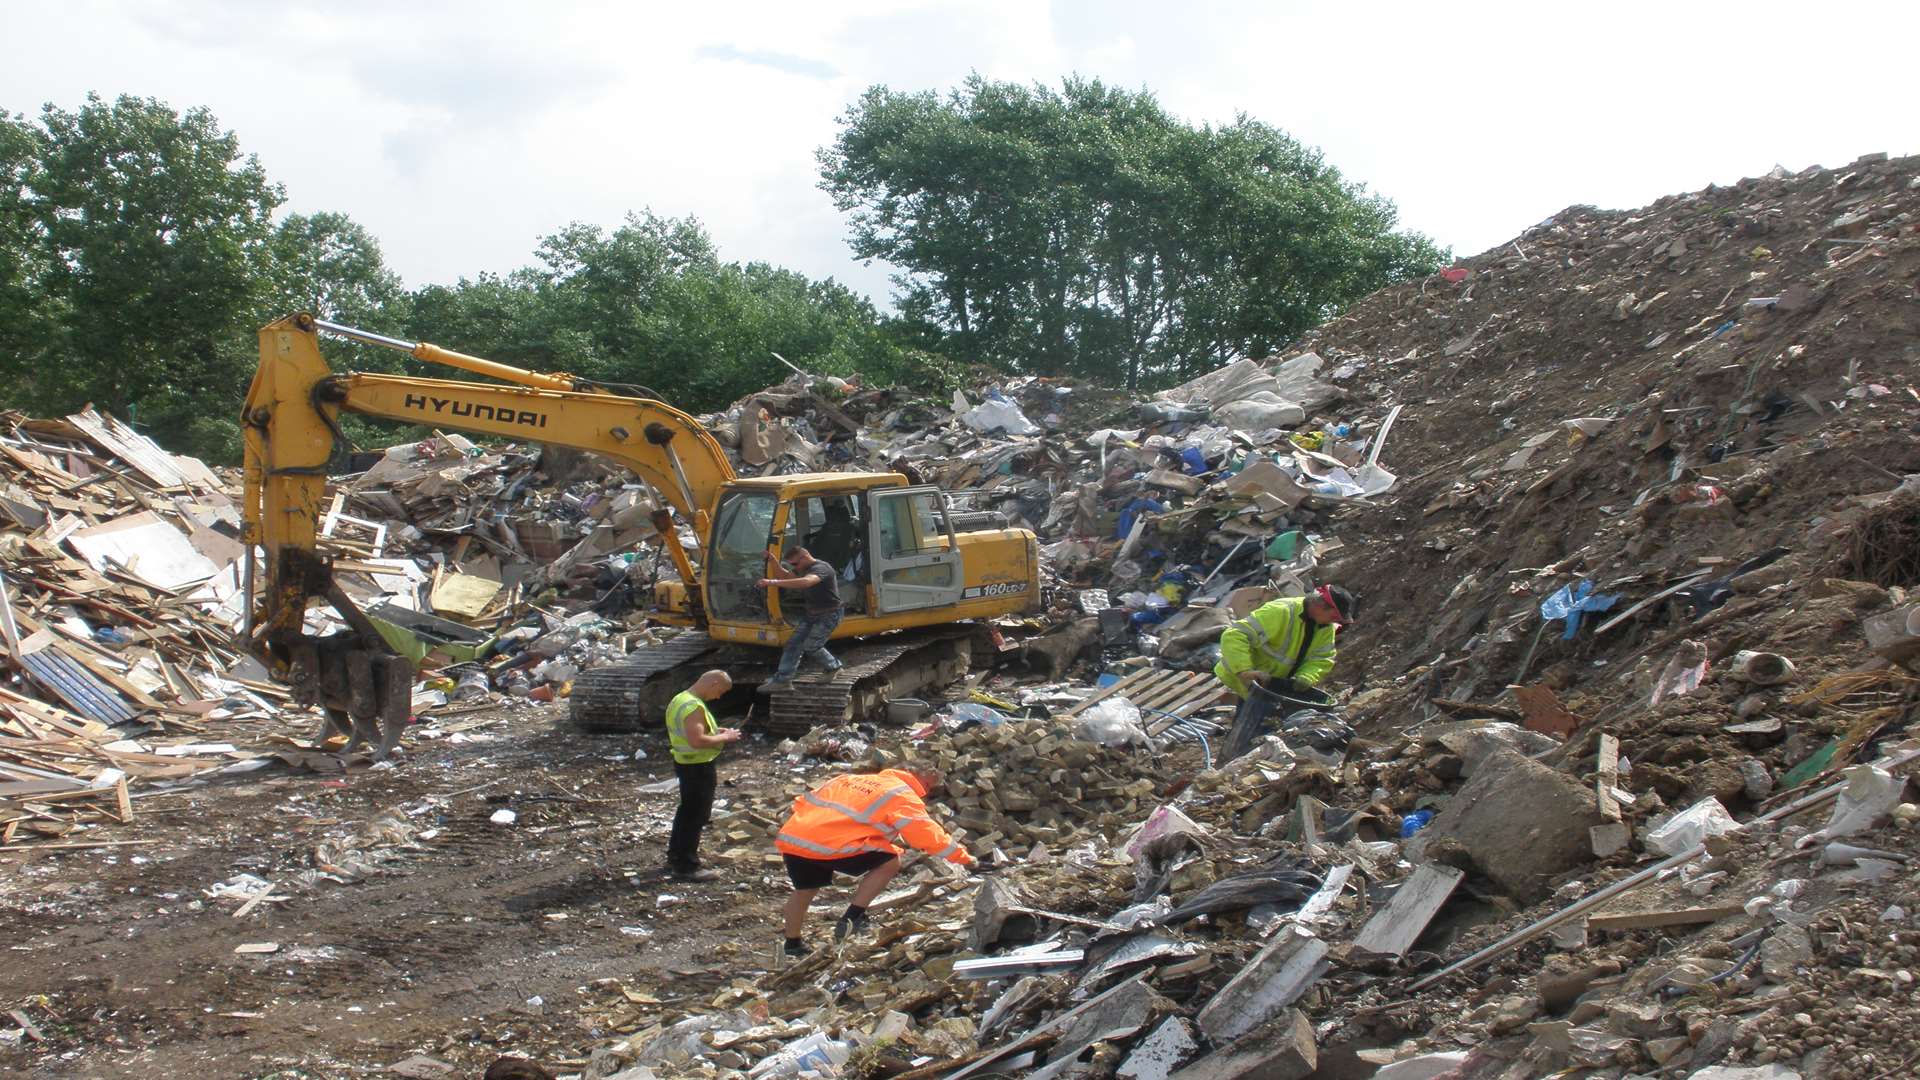 Walsh Skip Hire Limited were found to be operating illegally following an Environment Agency investigation